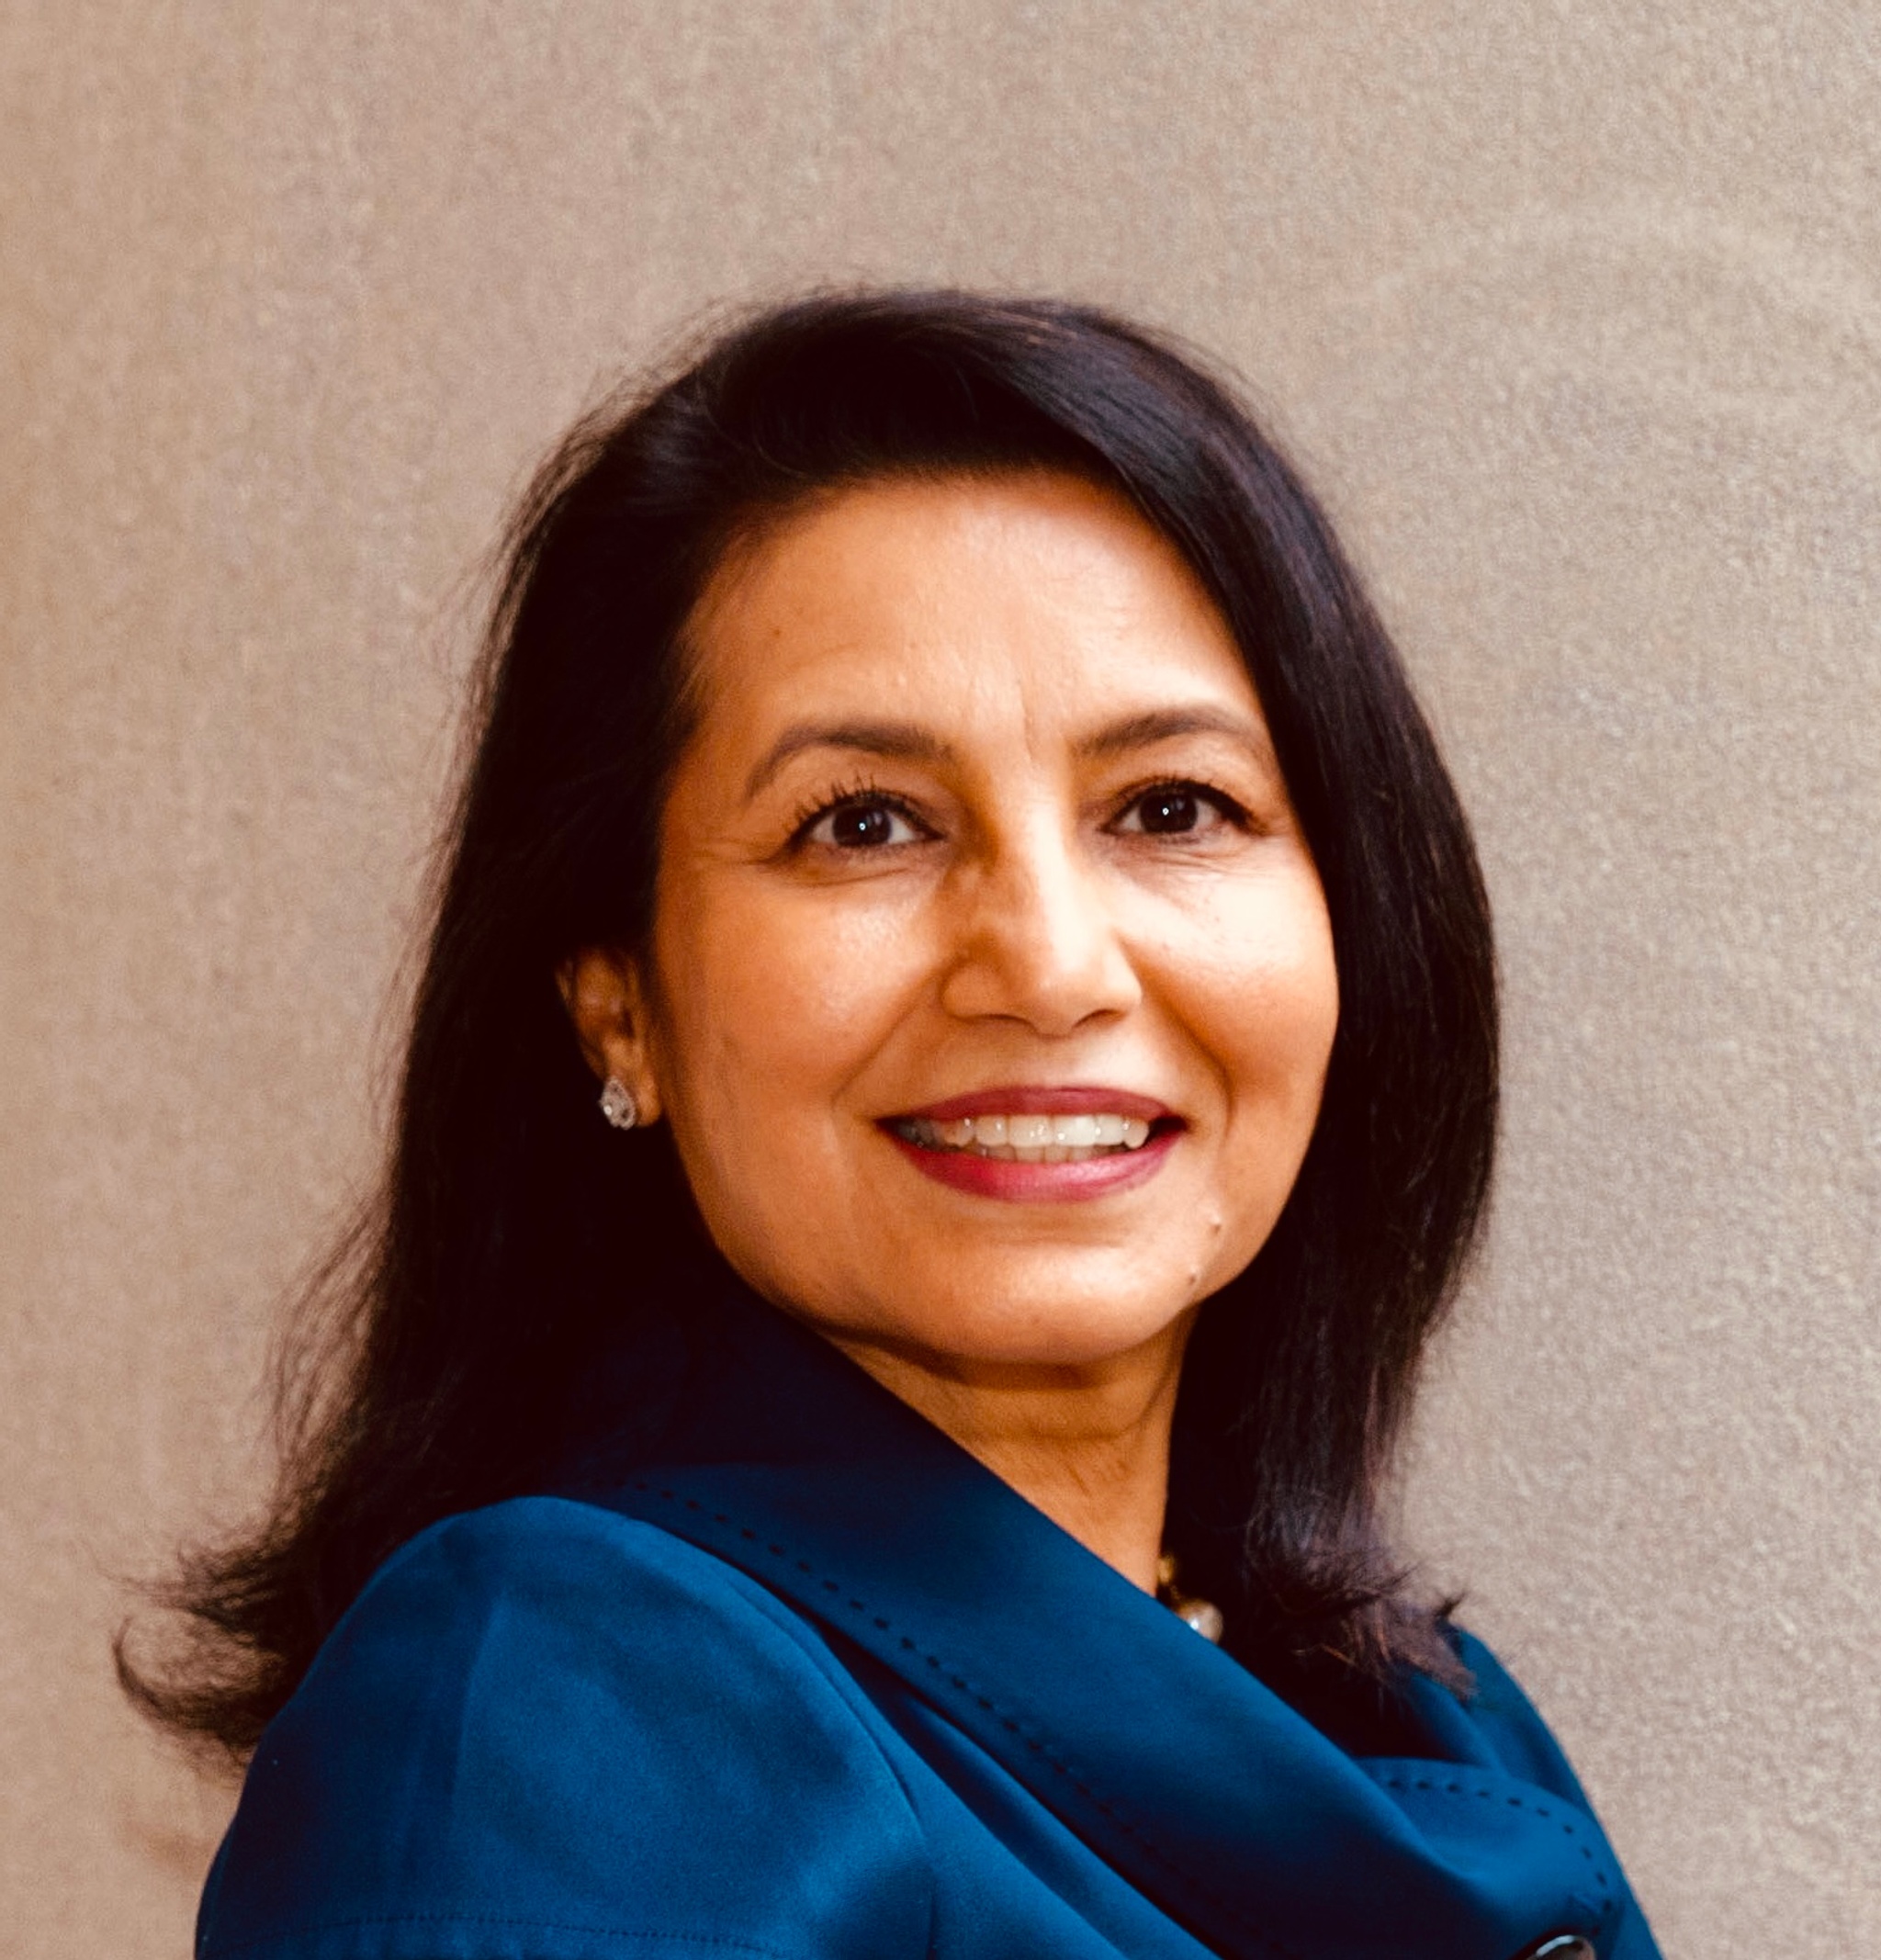 A headshot of Purnima Kapur, who had shoulder-length brown hair, and turns her head to look at us while smiling. She wears a royal blue blouse with short sleeves and a cowl neck.